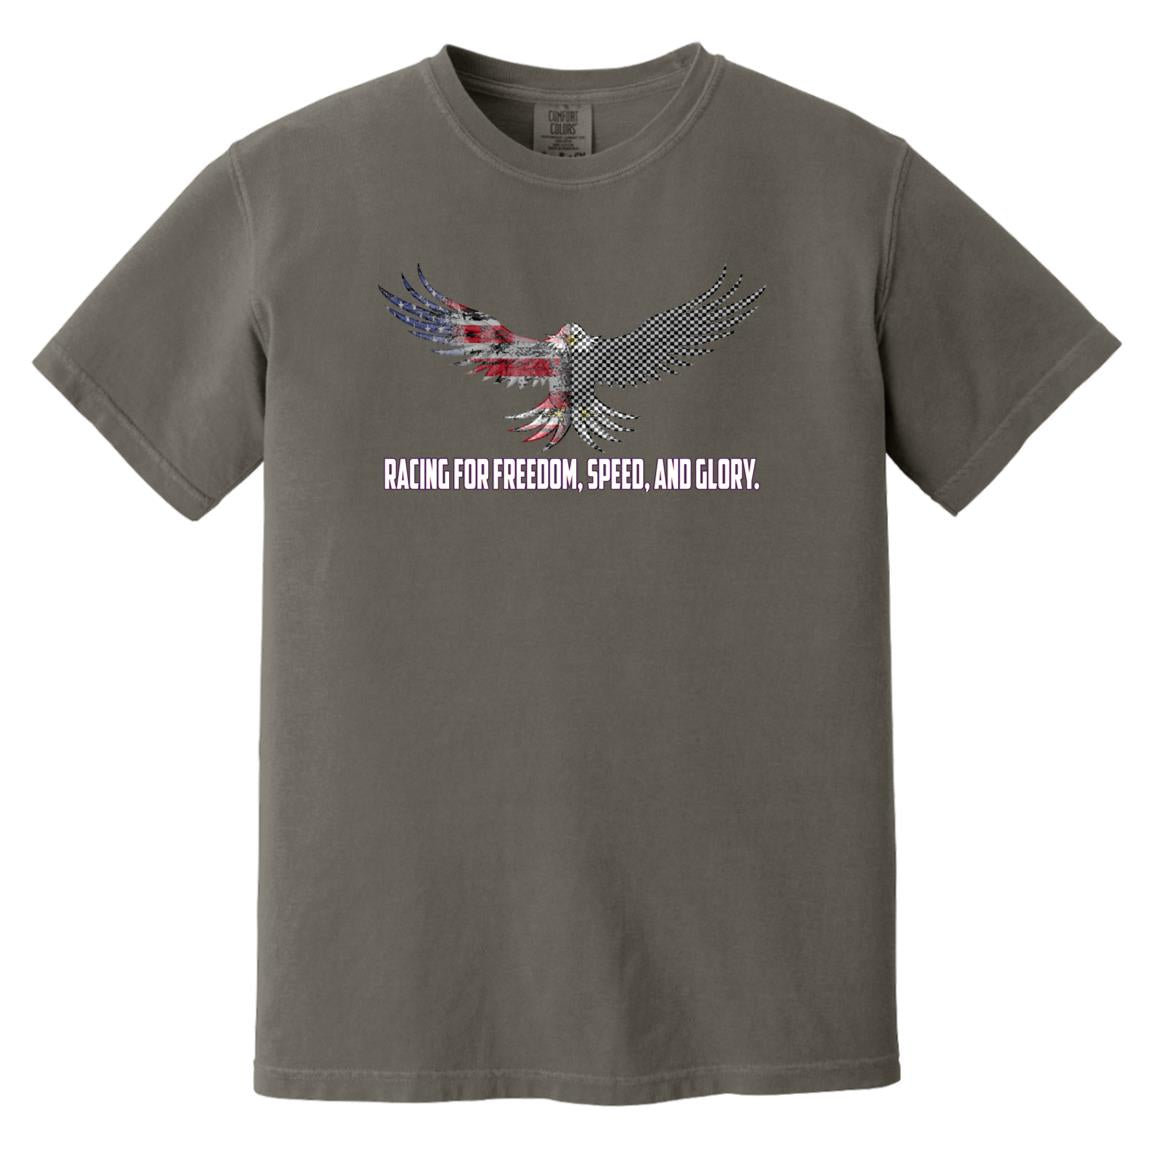 Racing For Freedom, Speed, And Glory Heavyweight Garment-Dyed T-Shirt